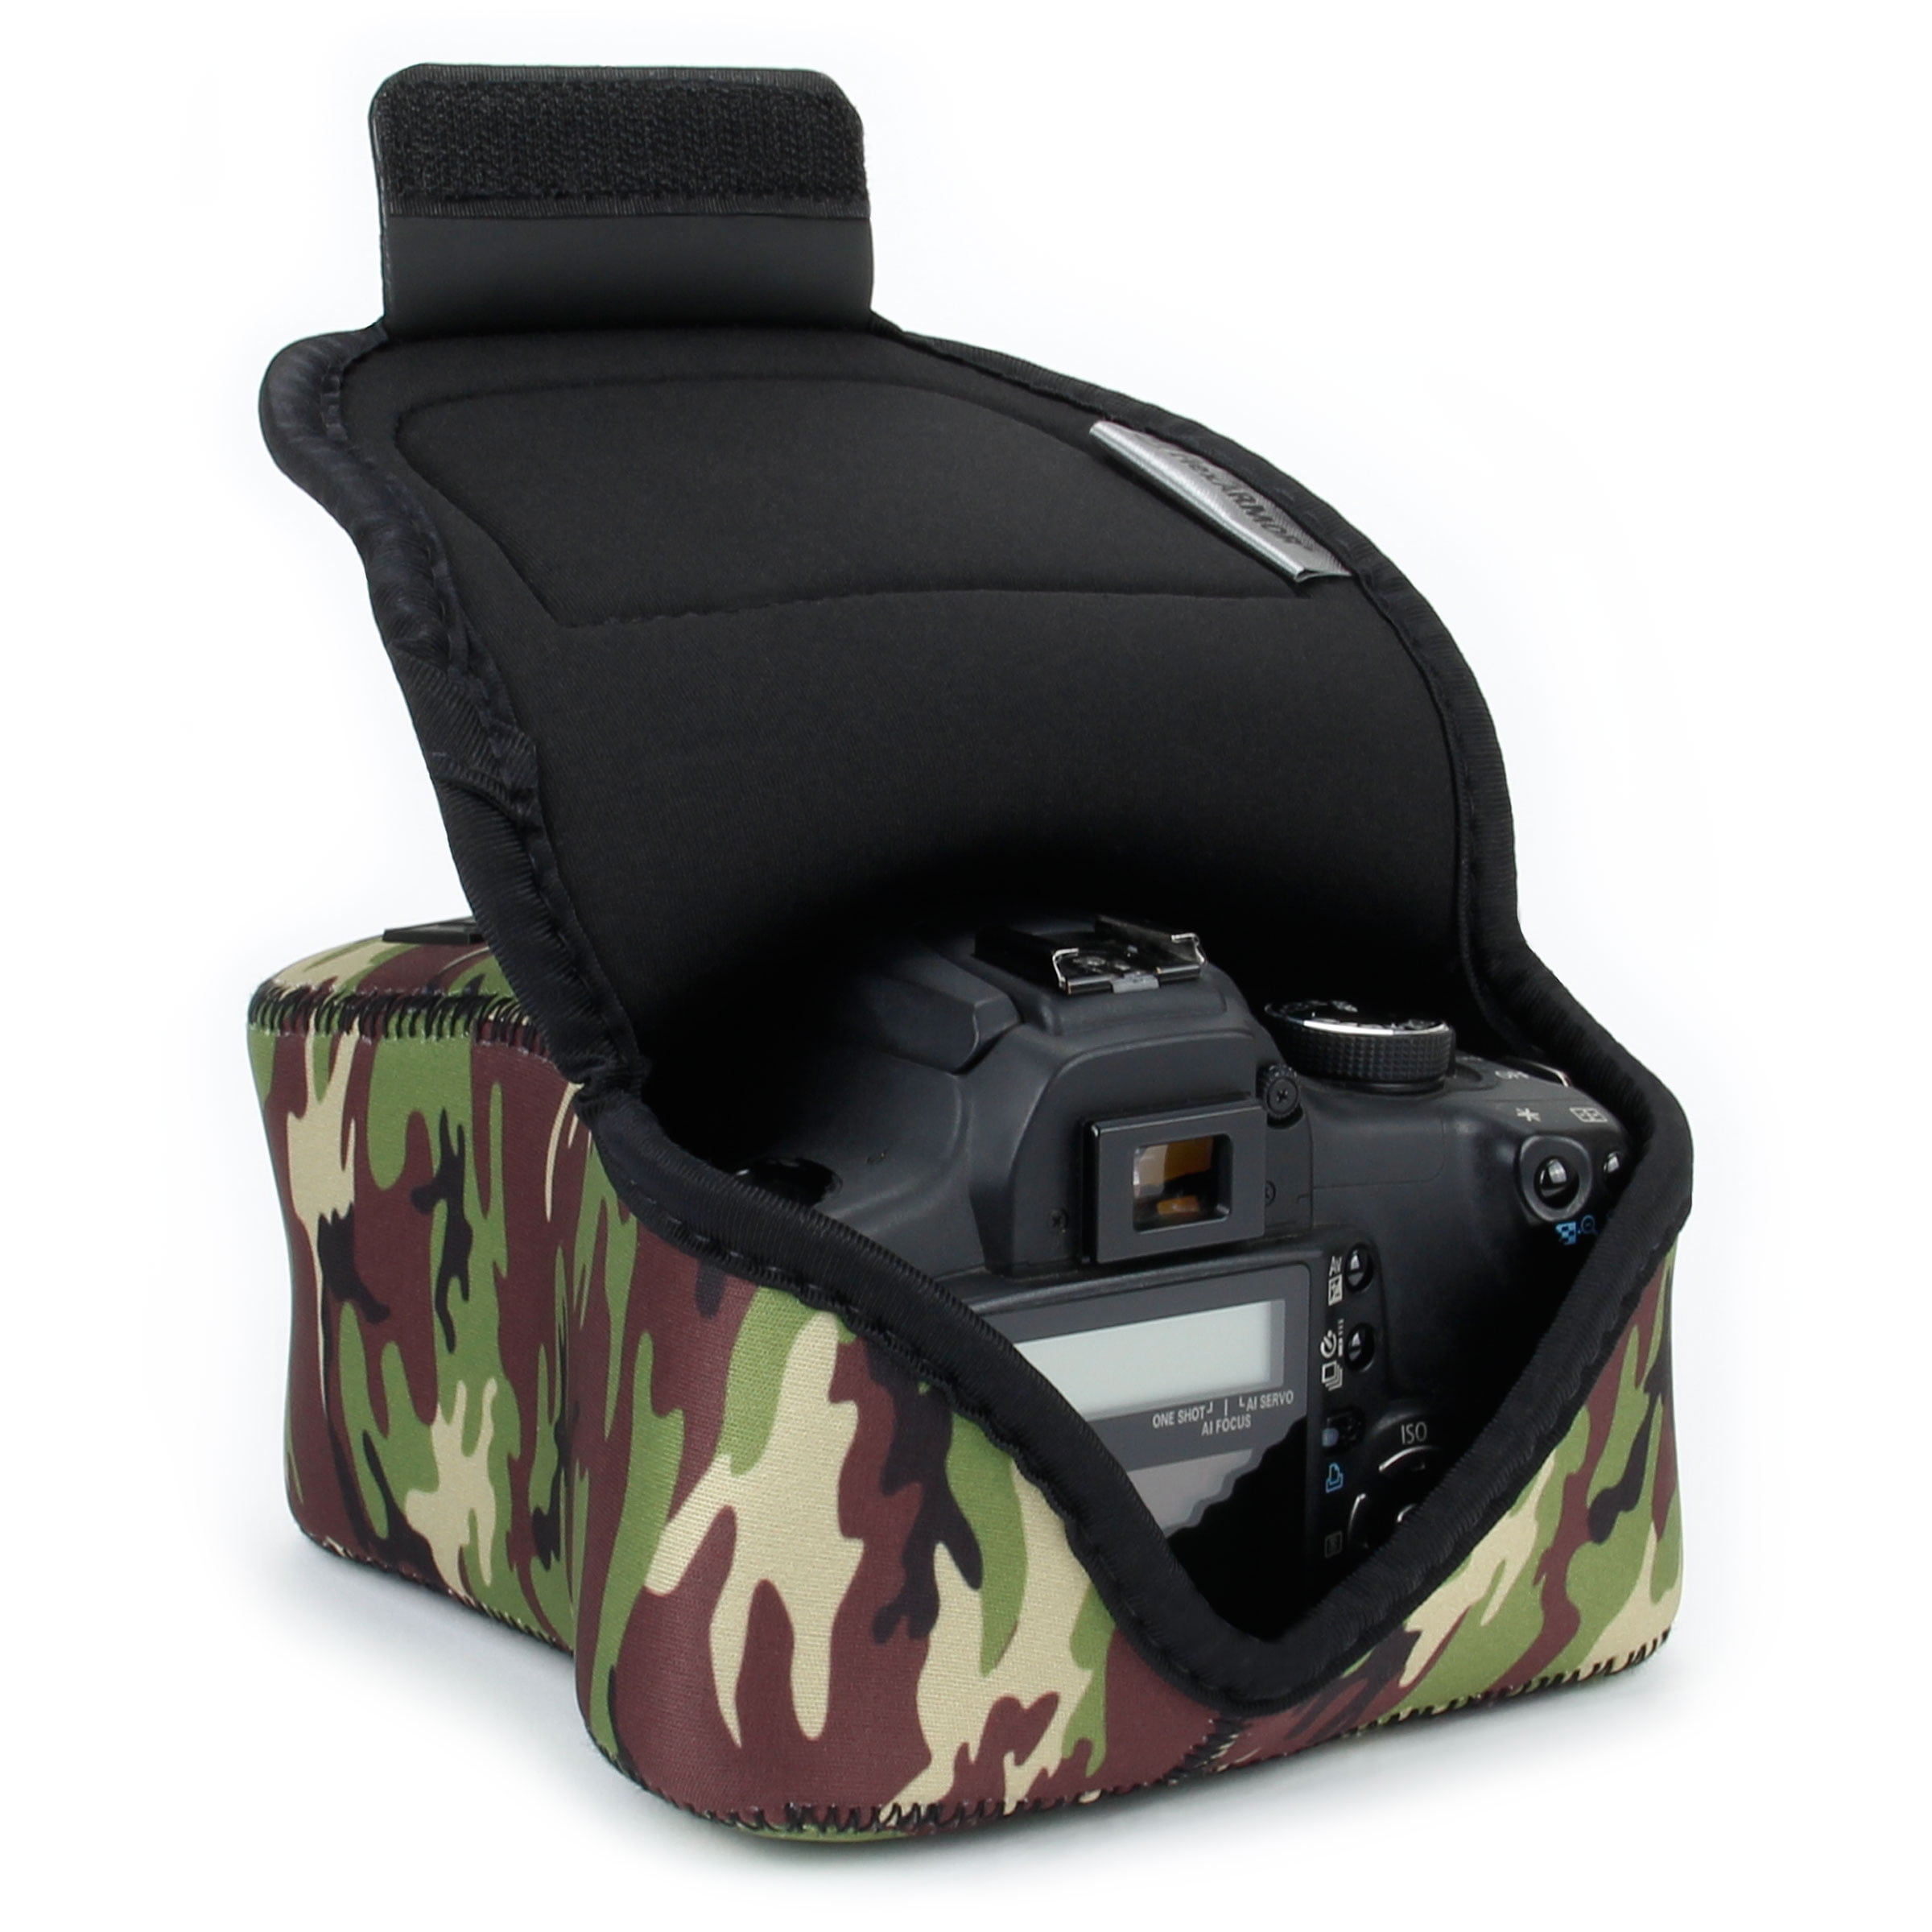 USA GEAR DSLR Camera Case/SLR Camera Sleeve (Camo Green) with Neoprene  Protection, Holster Belt Loop and Accessory Storage 